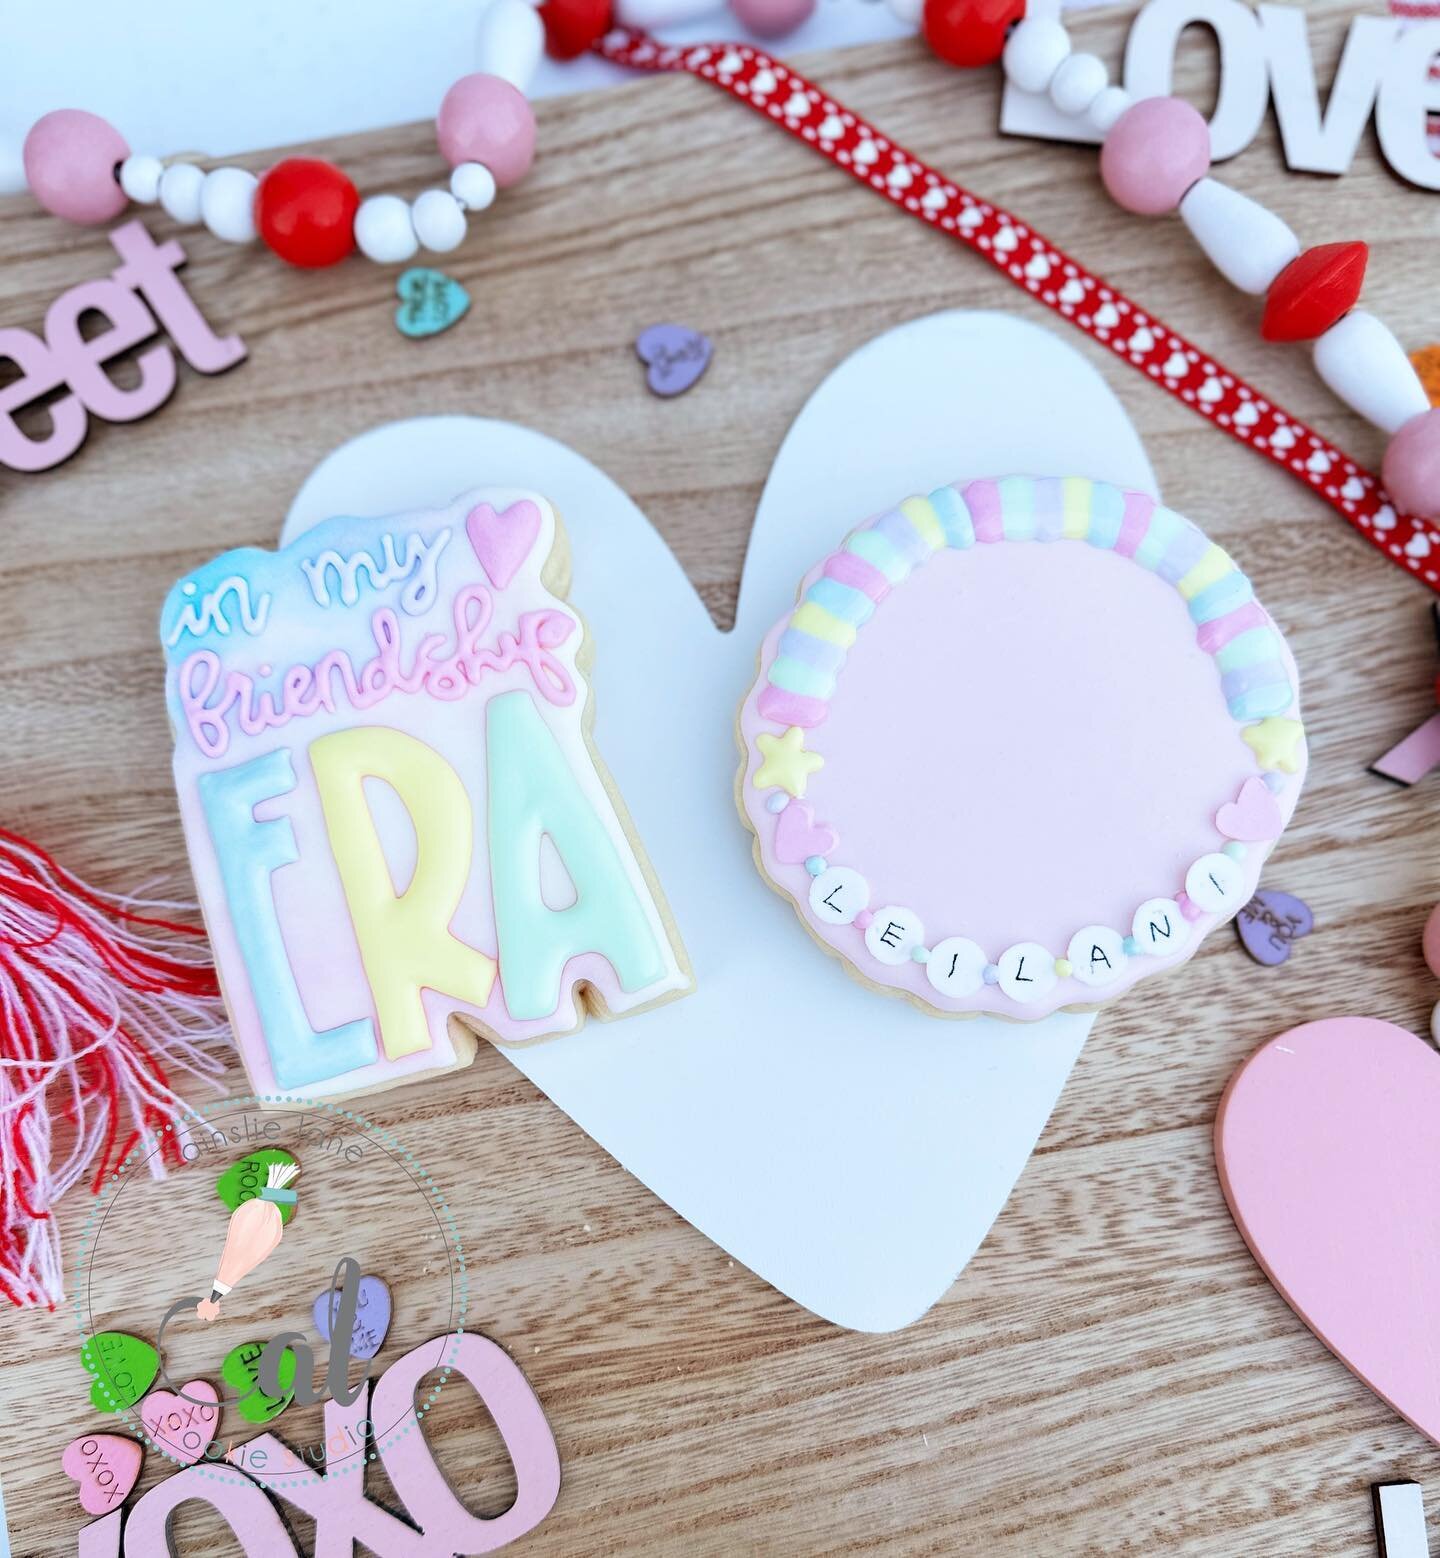 In my friendship era 💕 

Valentine&rsquo;s Day preorder is live! Go to www.ainslielanecookiestudio.com/shopcookies to place your order! 
&bull;
&bull;
&bull;
&bull; #valentinescookies #friendshipbraceletcookies #friendshipera #ainslielanecookiestudi